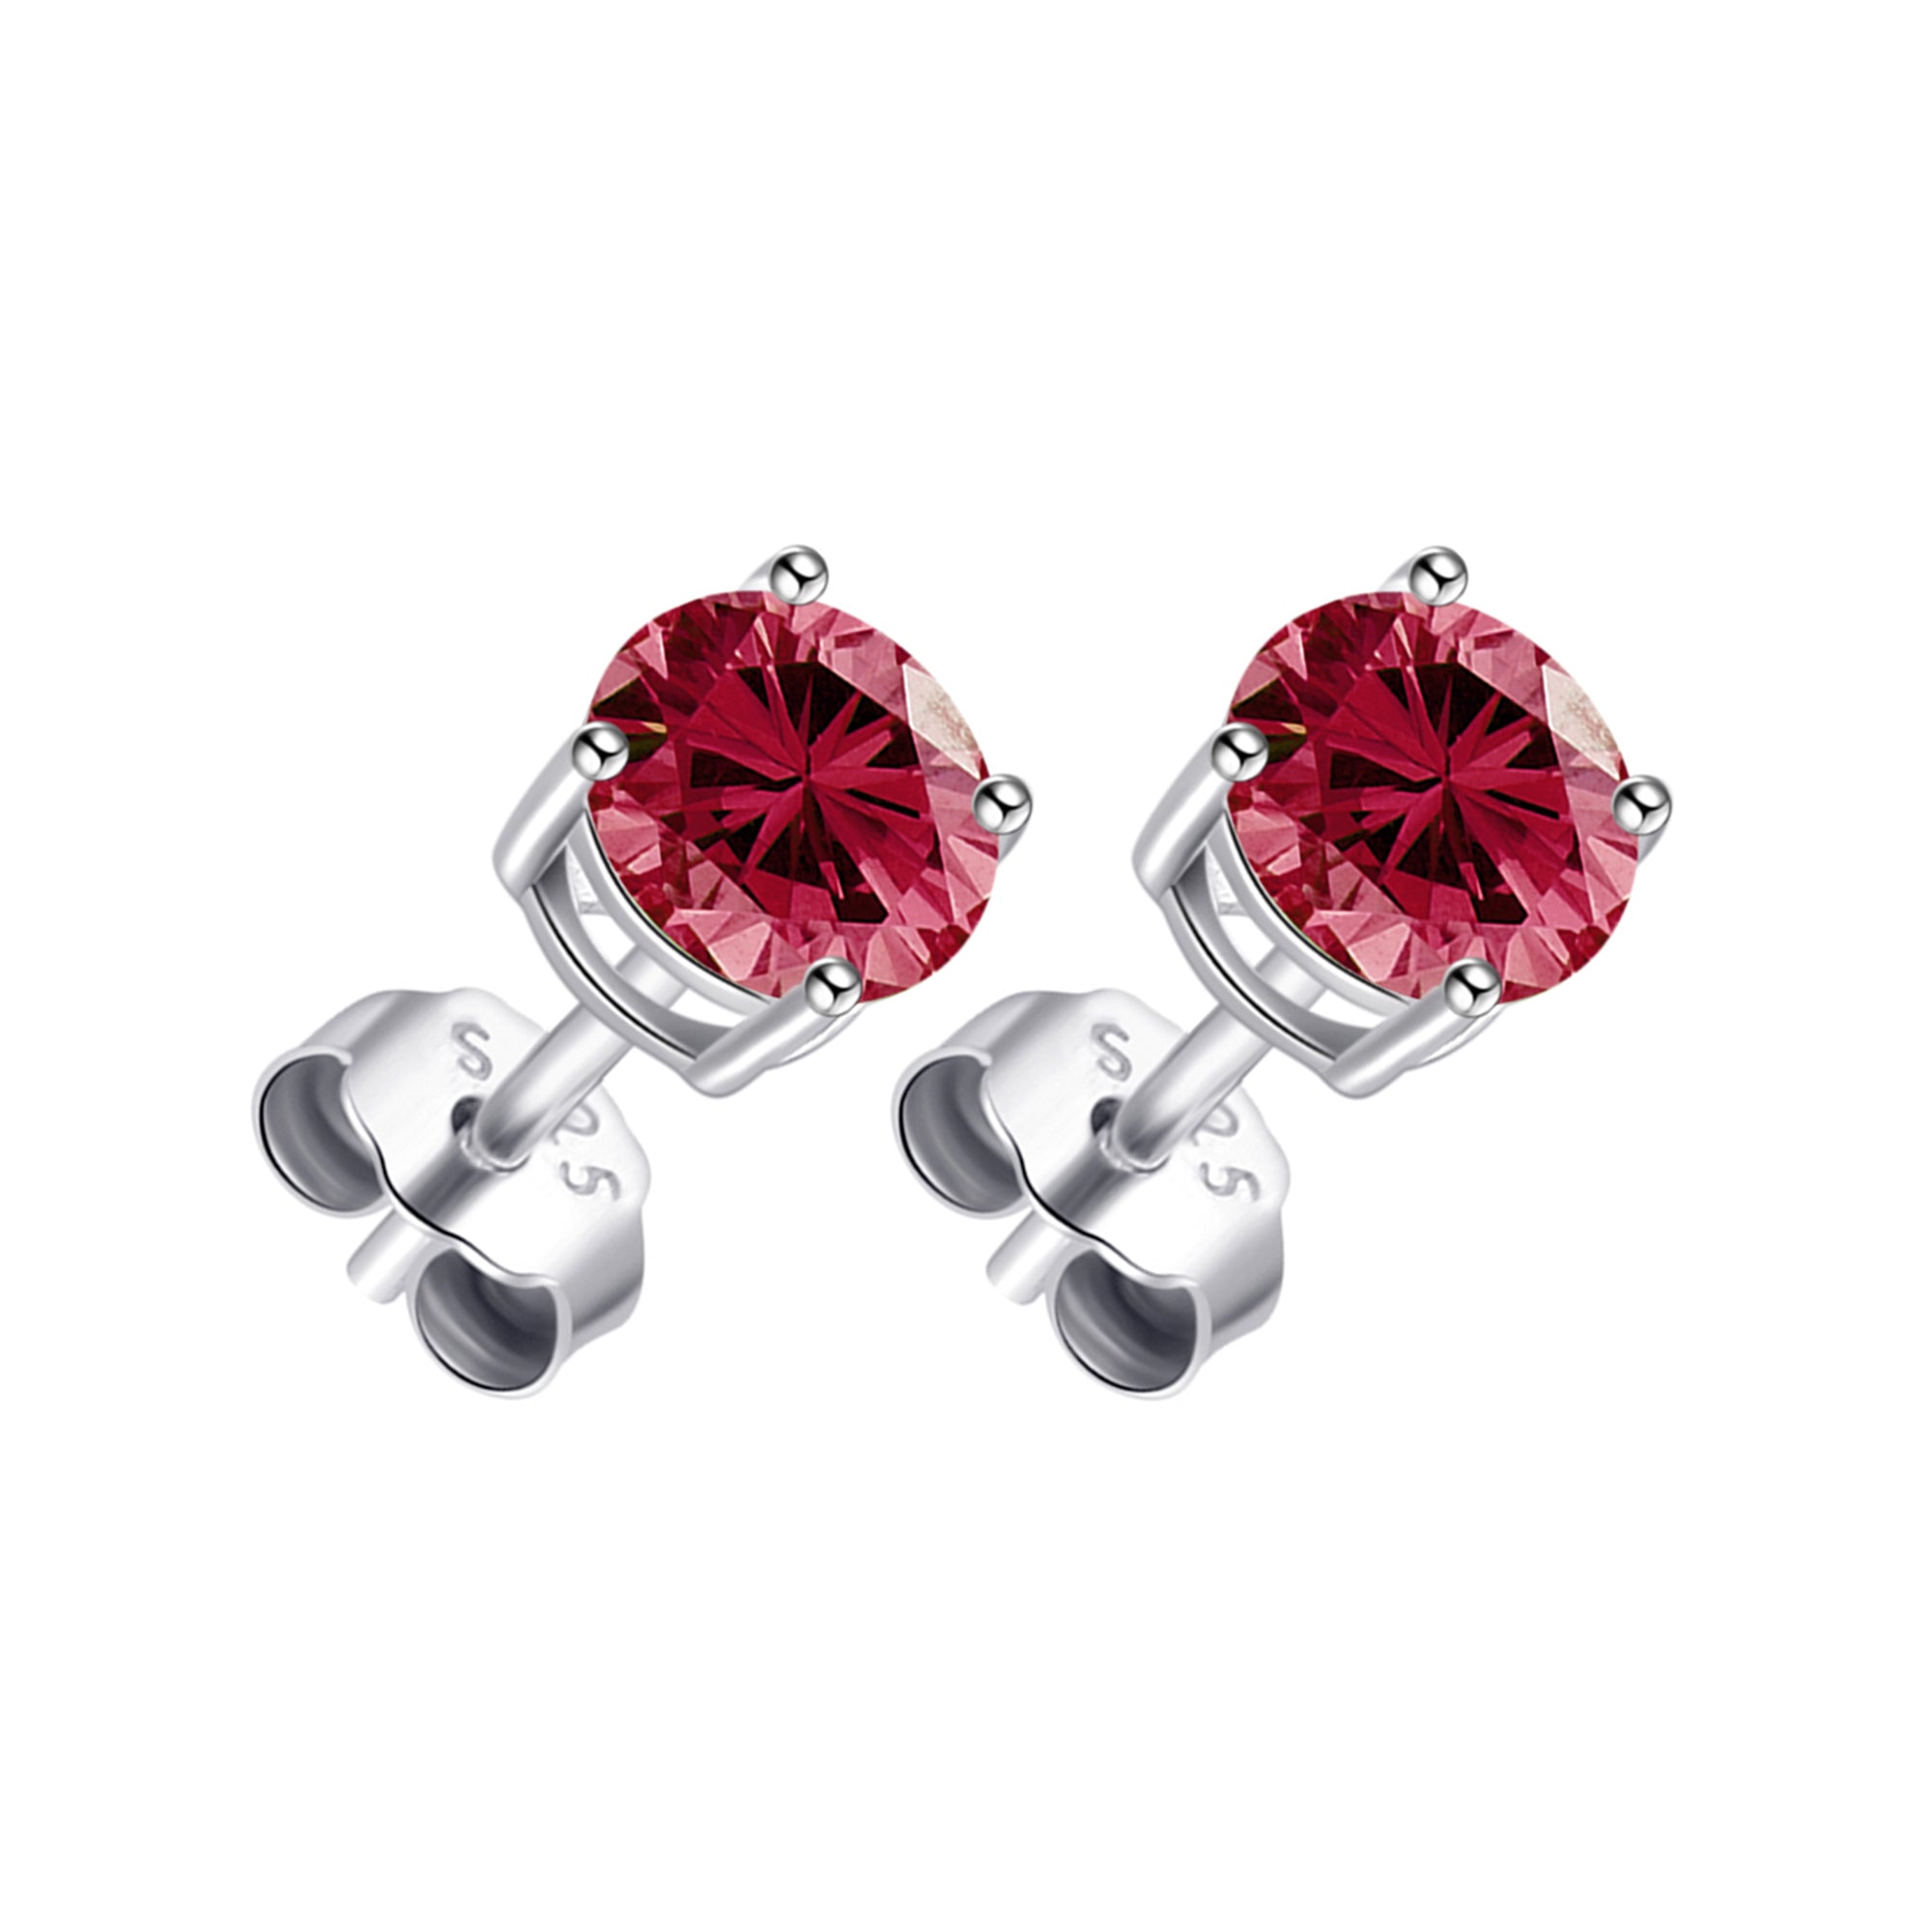 Sterling Silver Red Earrings Created with Zircondia® Crystals by Philip Jones Jewellery